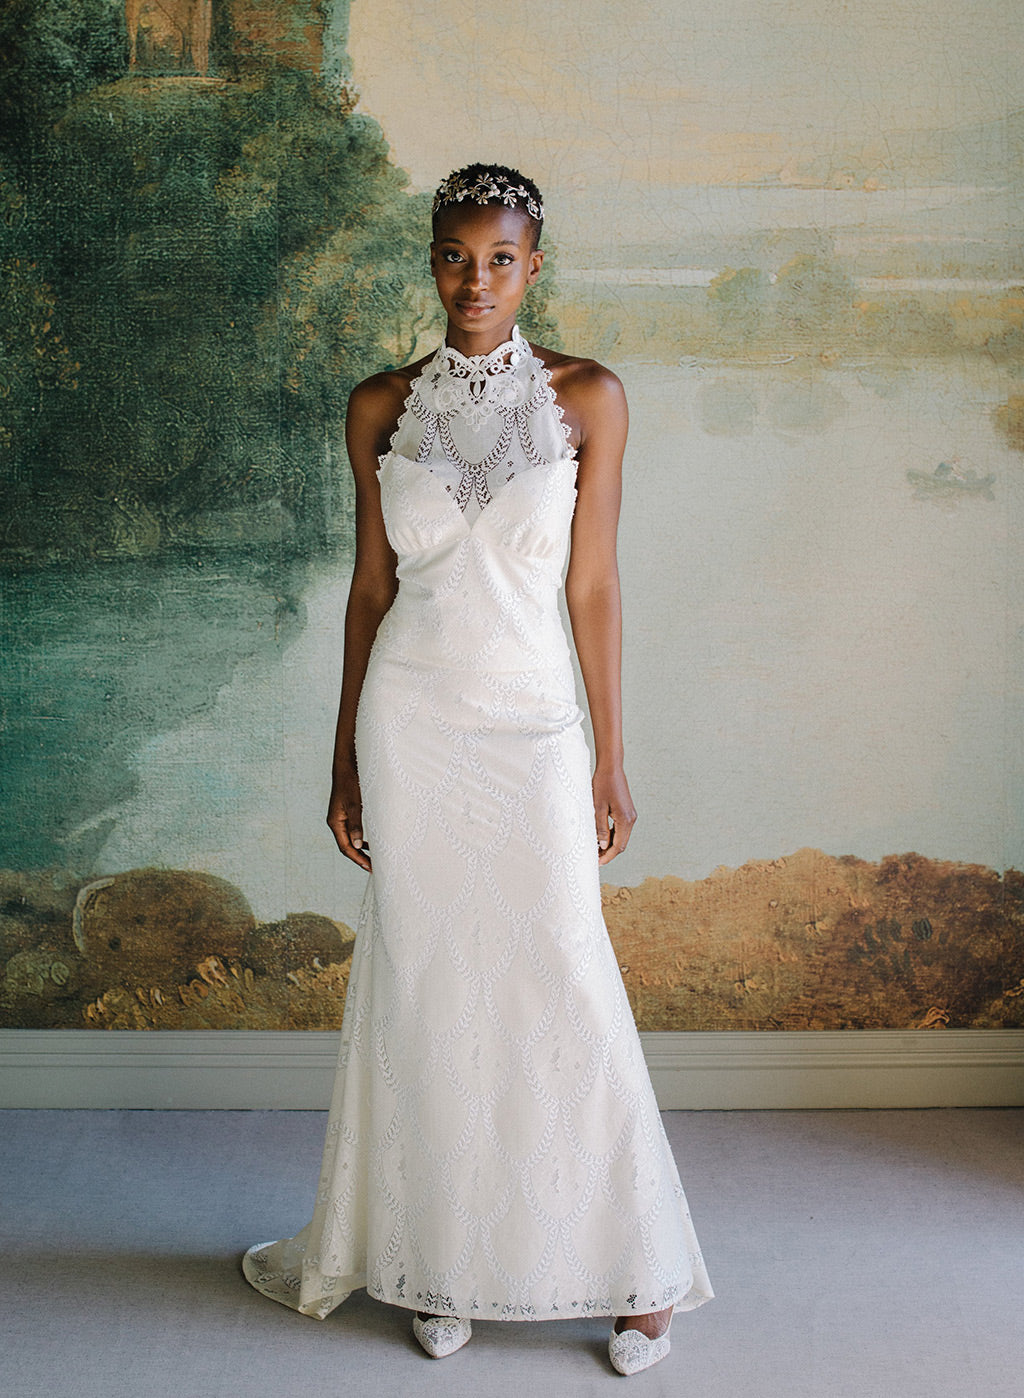 Calypso Lace Halter and Long Skirt Claire Pettibone Ready to Wear Bridal Separates